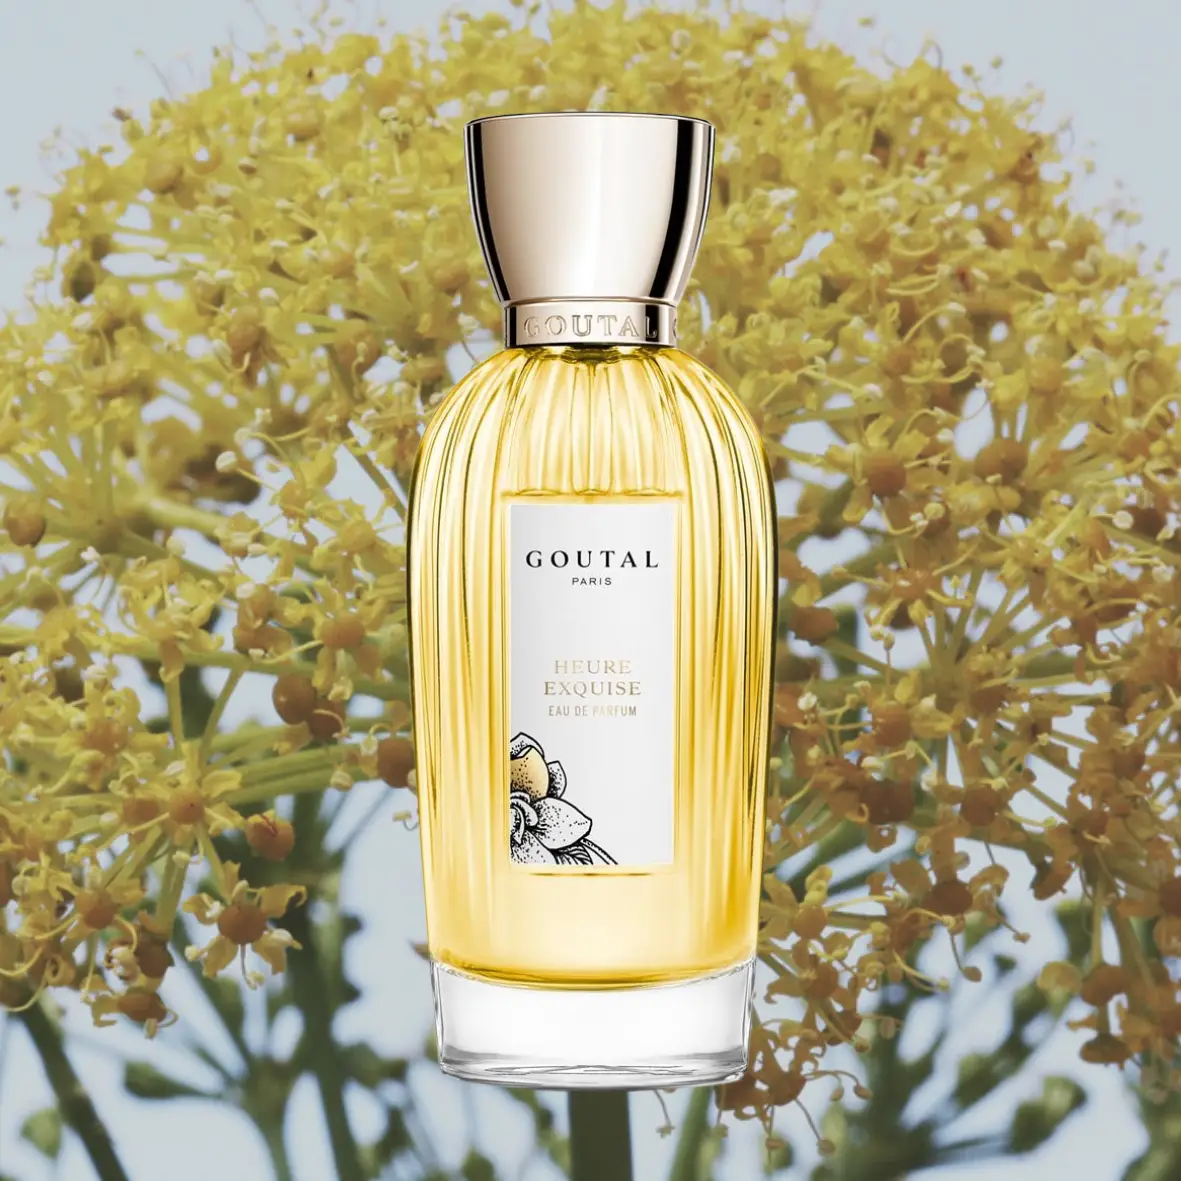 Annick Goutal Heure Exquise
Best Green Perfumes